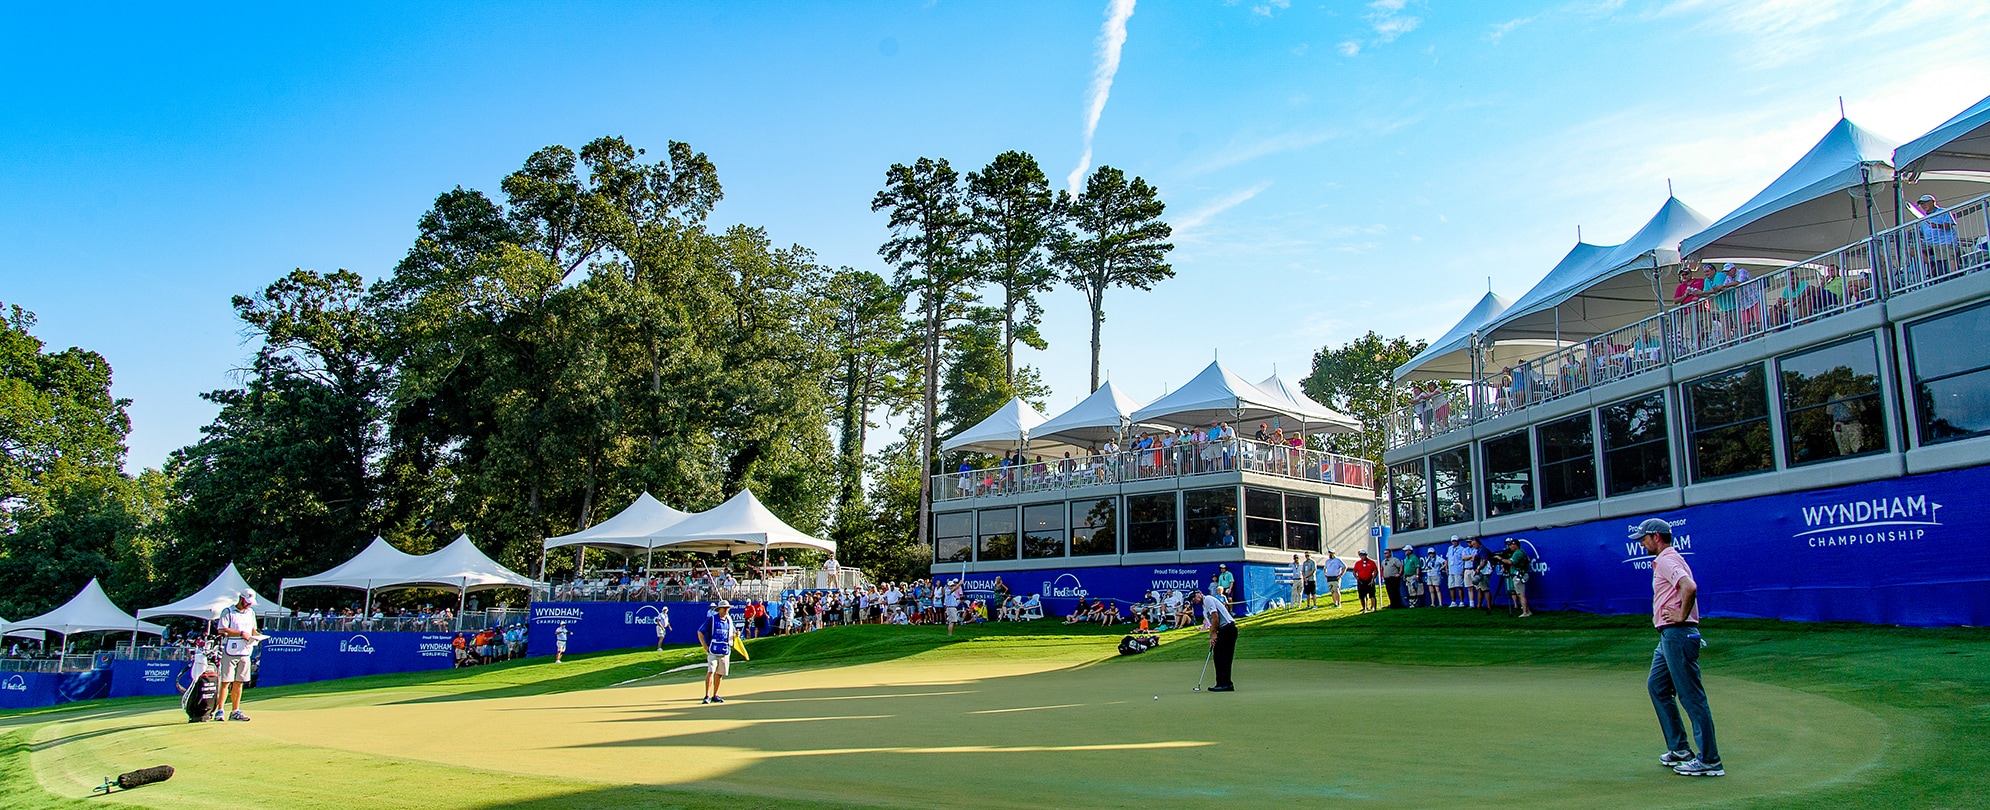 Golfers on a green with spectators watching from under tents at the Wyndham Championship.